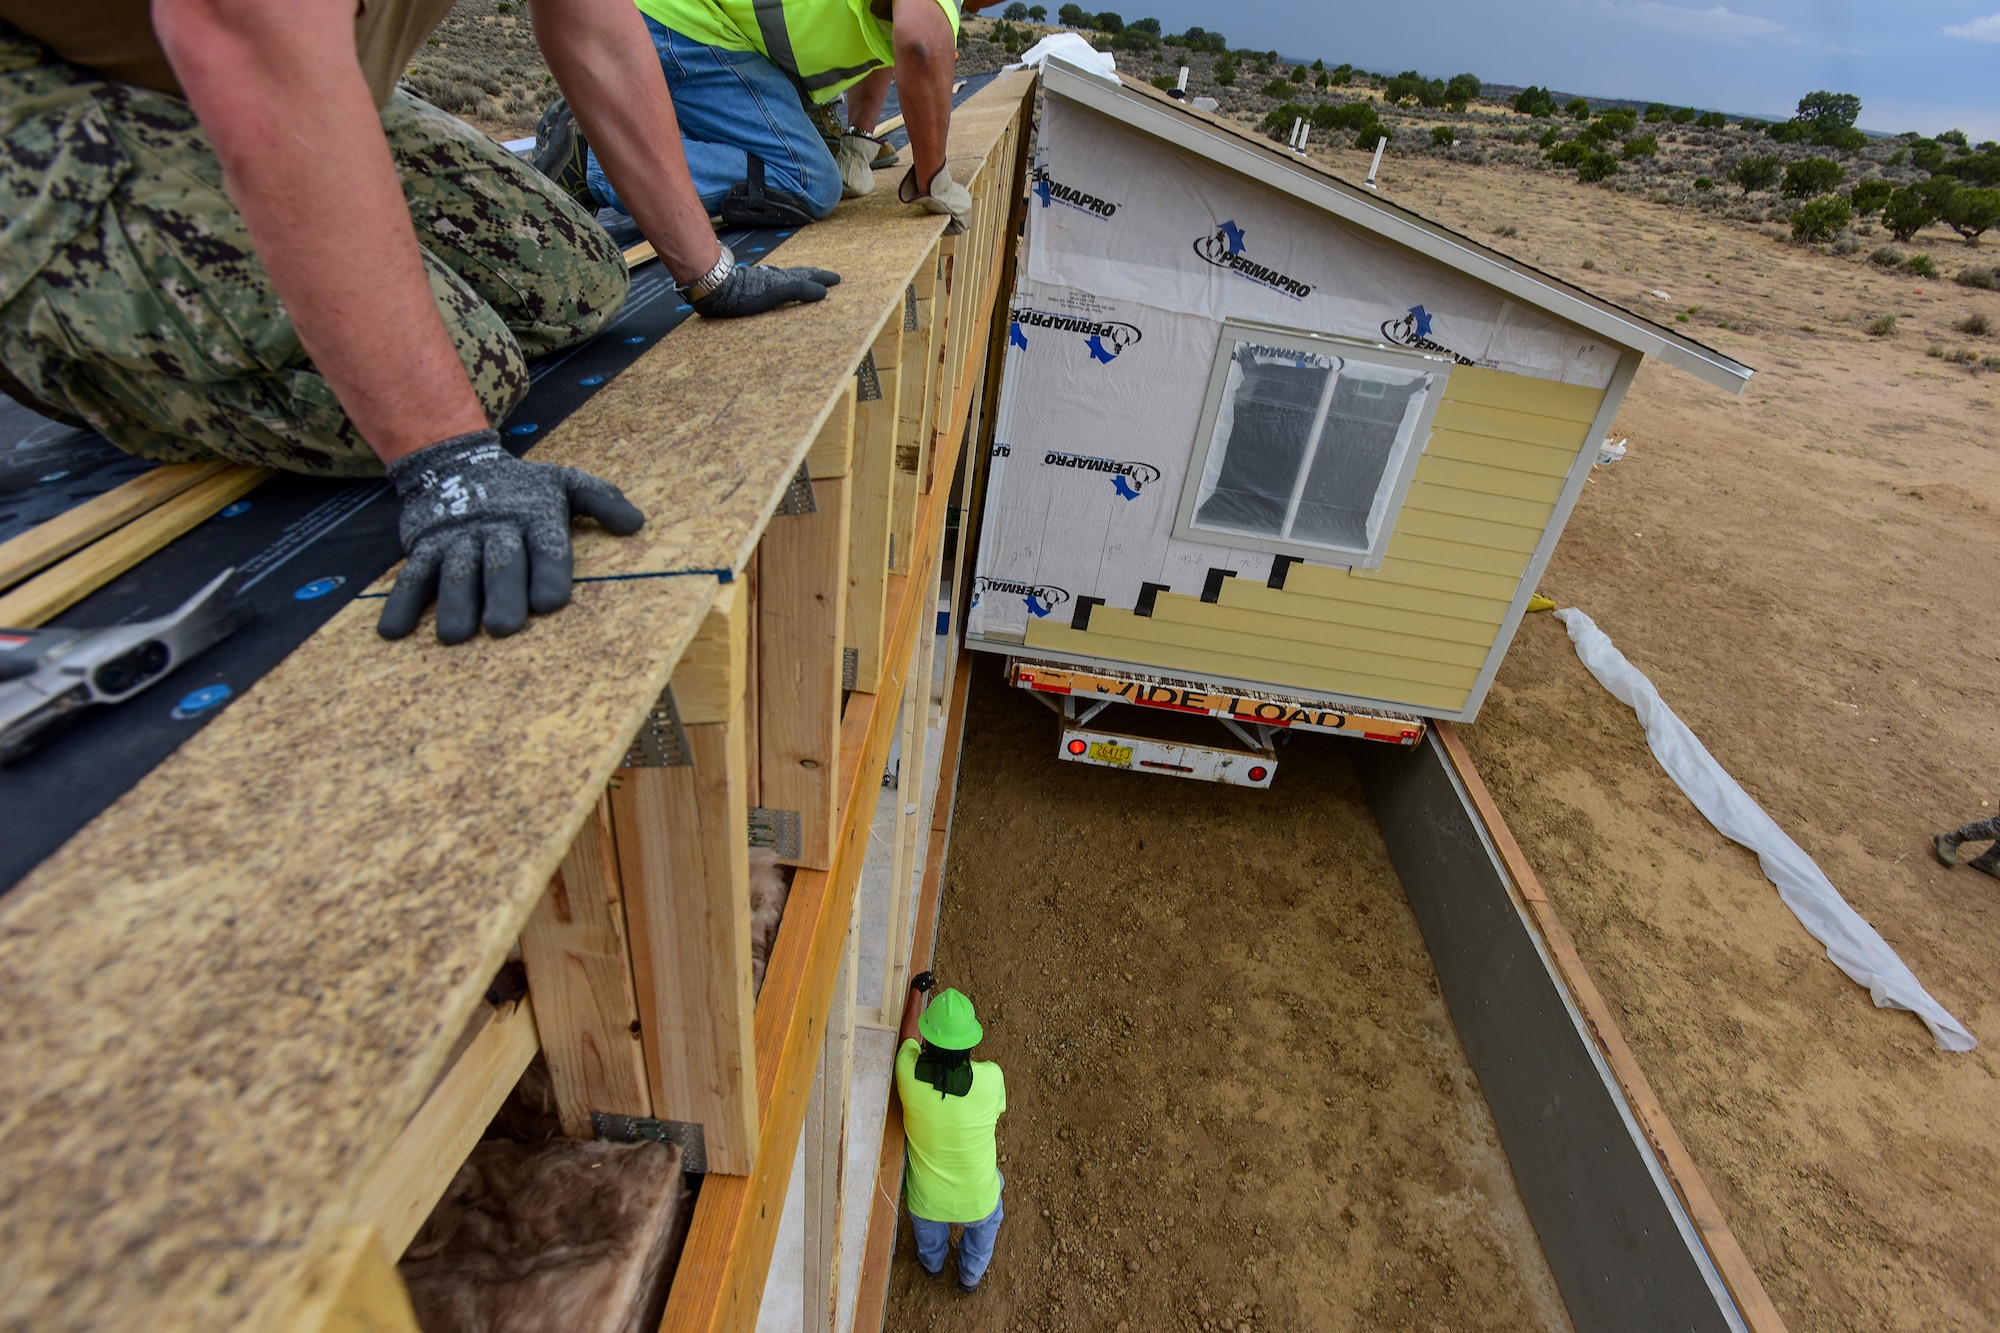 169th Civil Engineer Airmen build homes for Navajo veterans during training mission to New Mexico